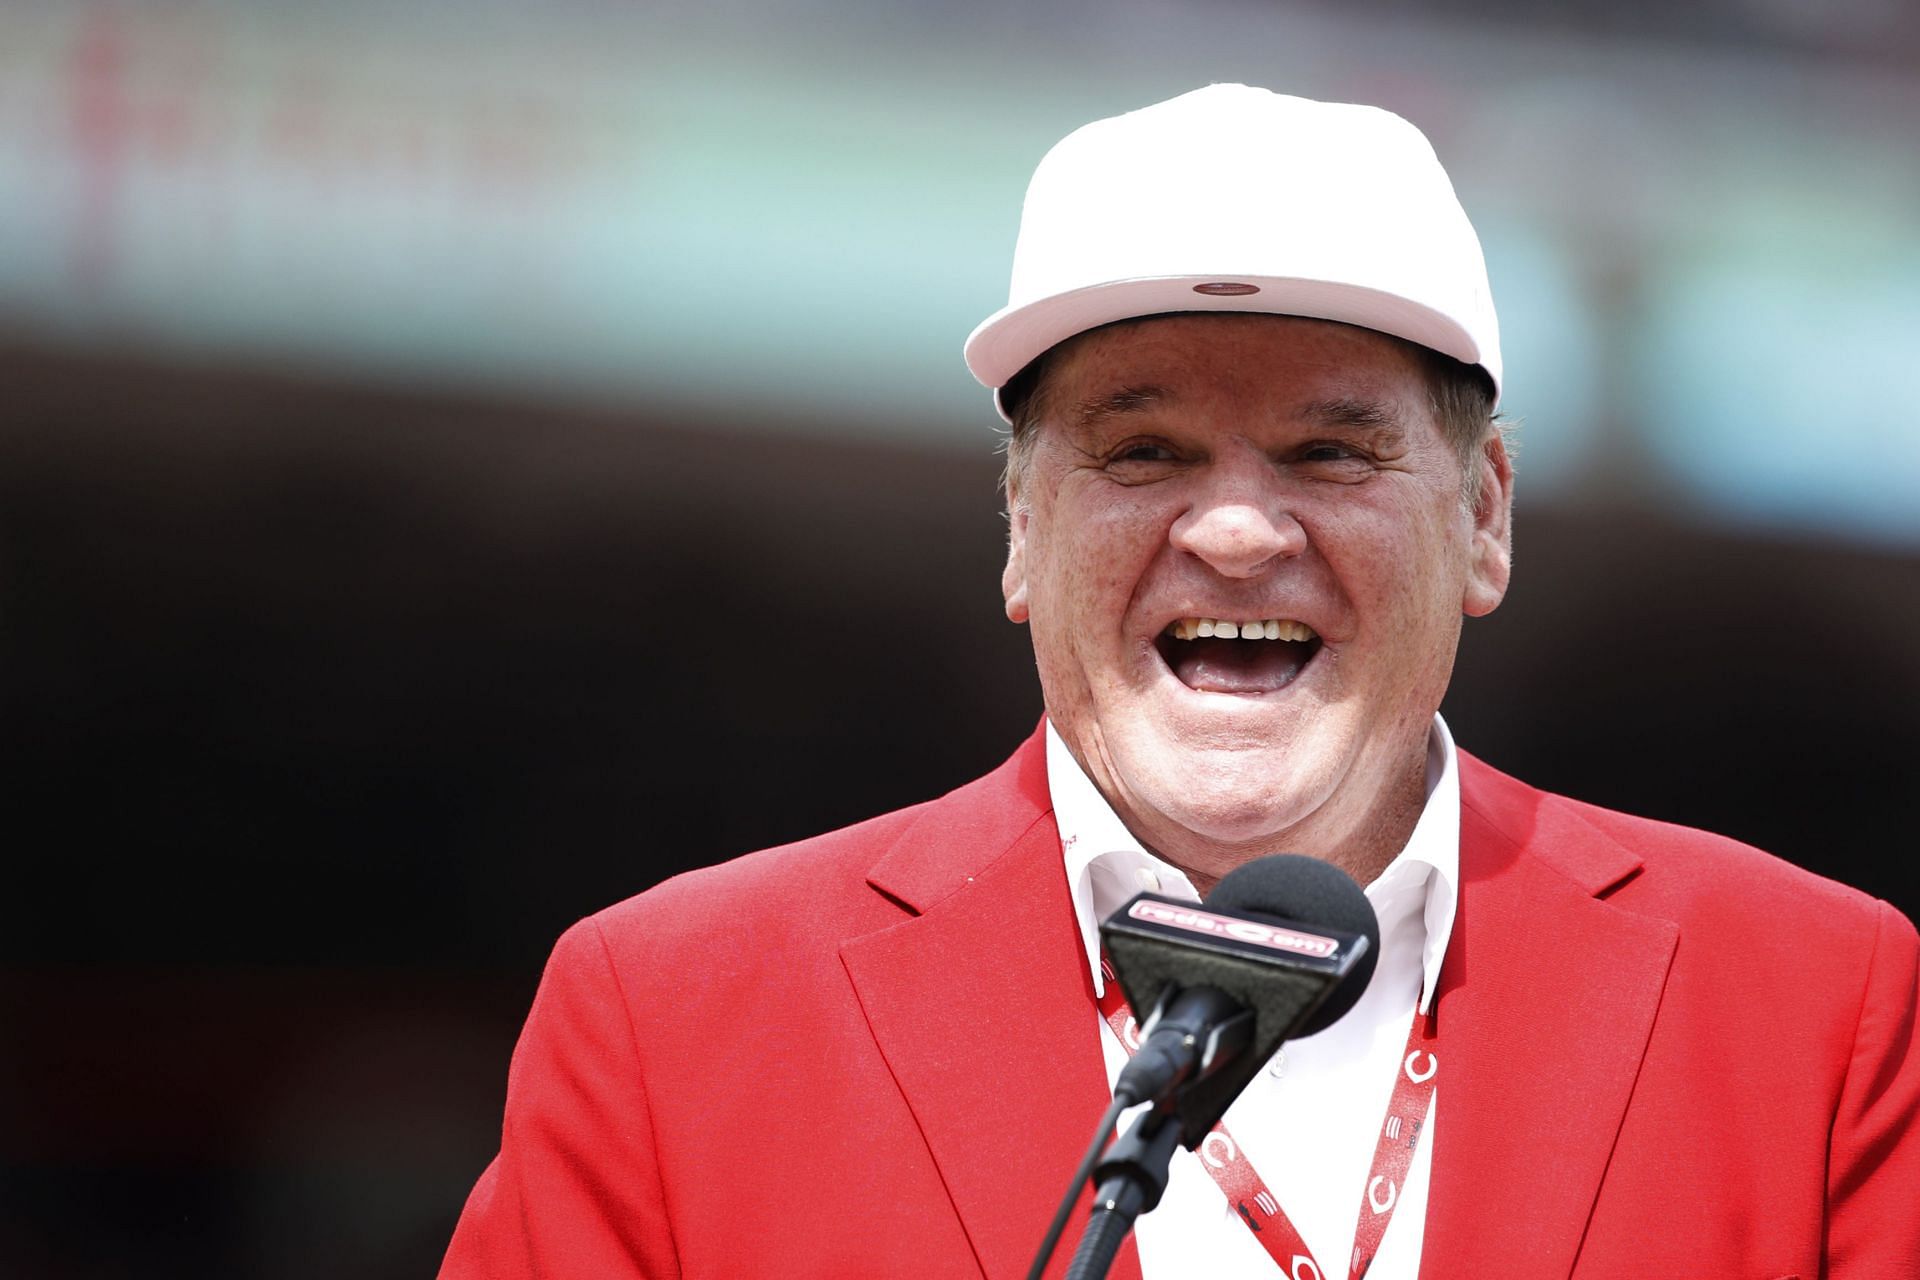 Former Cincinnati Reds great Pete Rose reacts during a statue dedication ceremony prior to a game against the Los Angeles Dodgers at Great American Ball Park on June 17, 2017 in Cincinnati, Ohio.